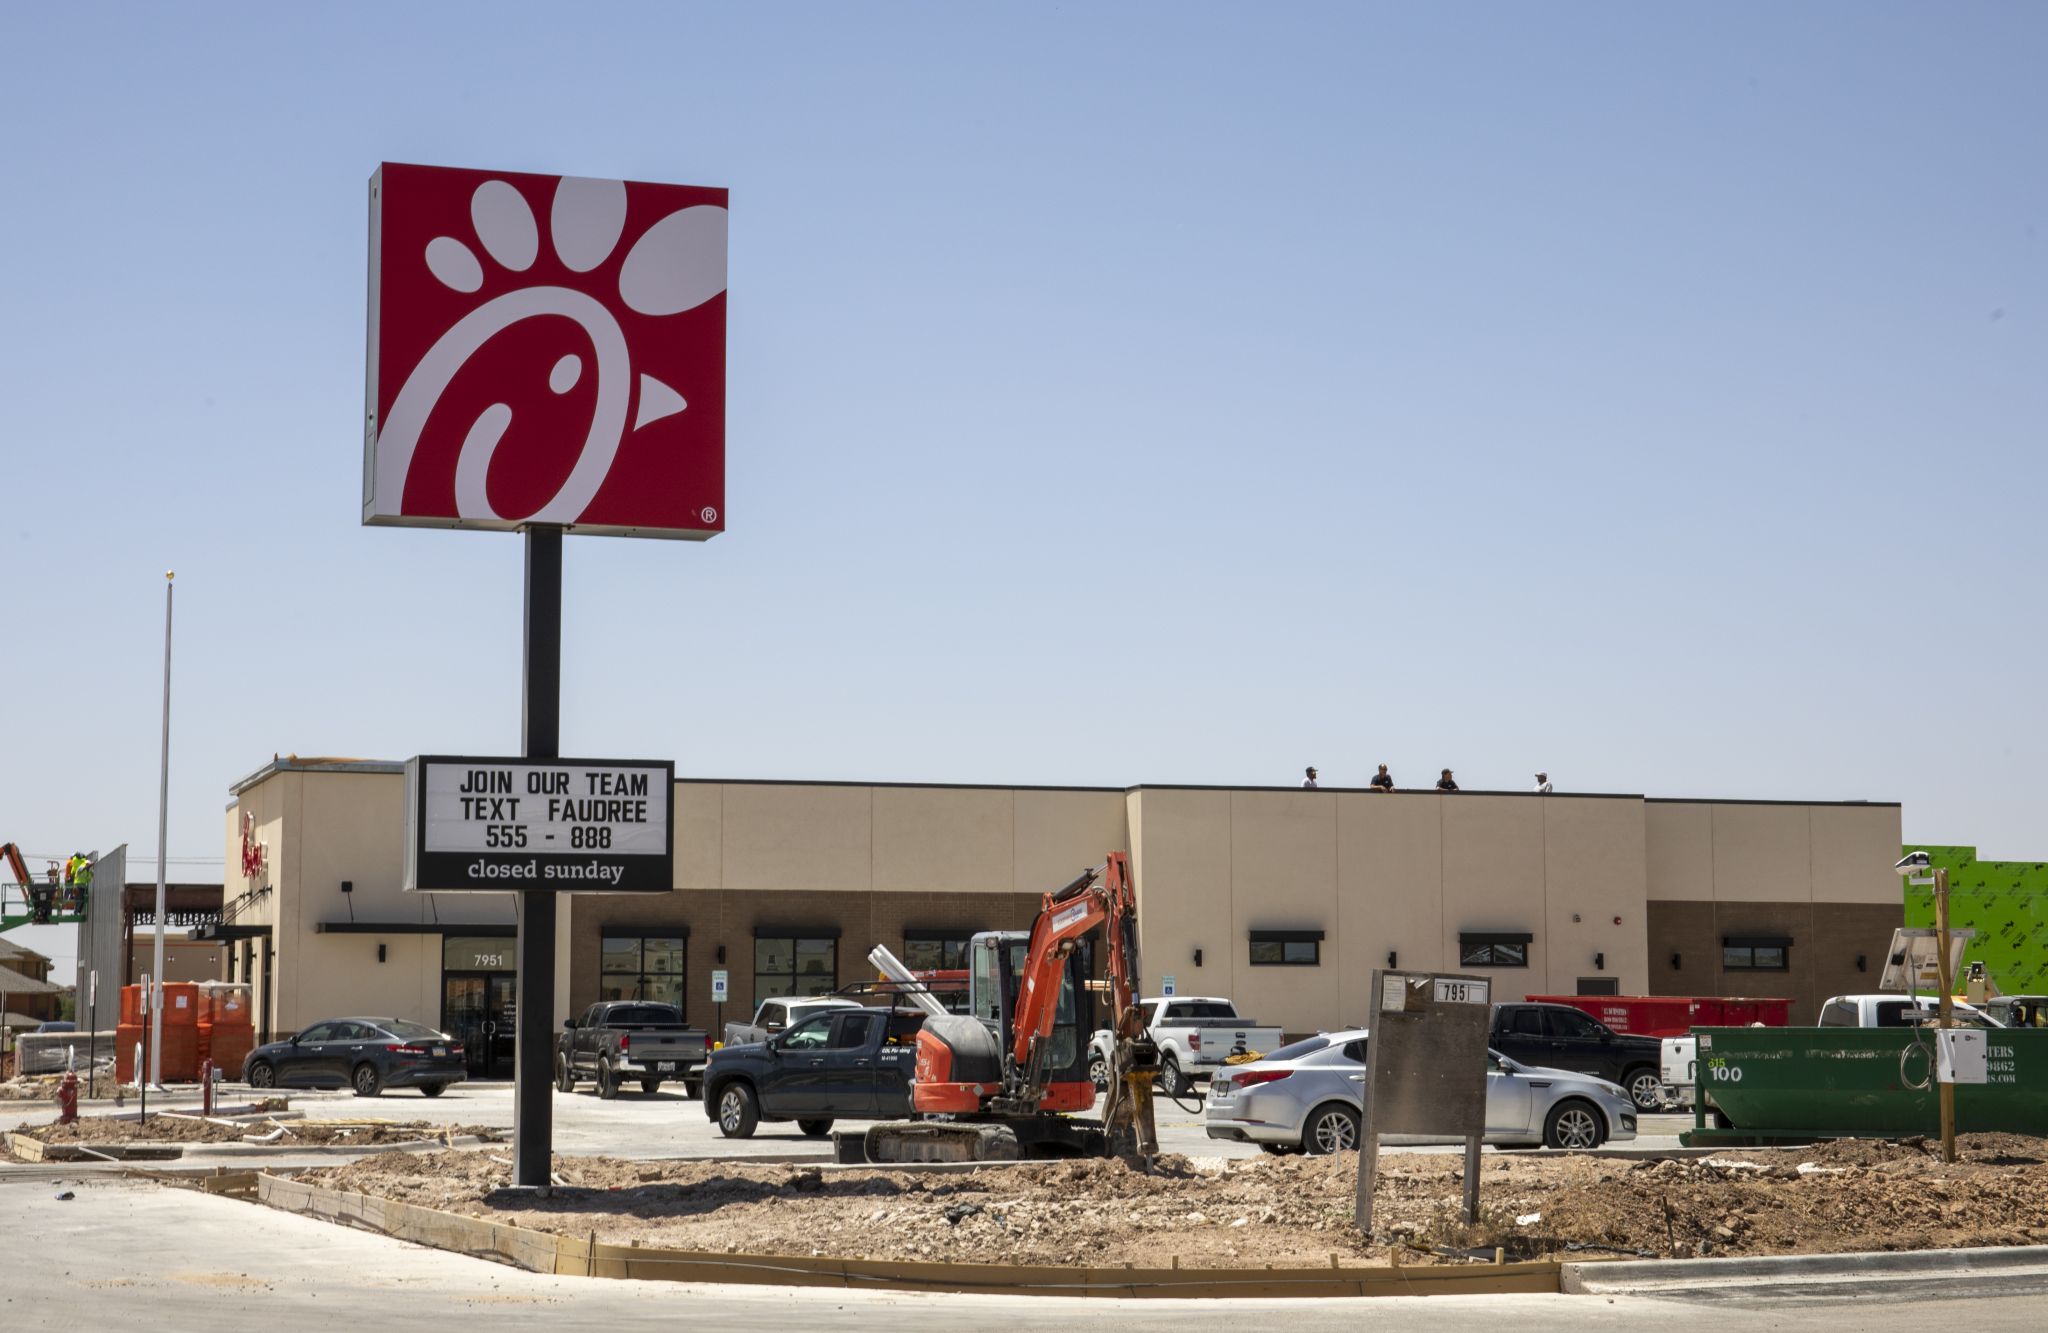 ChickfilA faces backlash on Twitter over company's DEI efforts